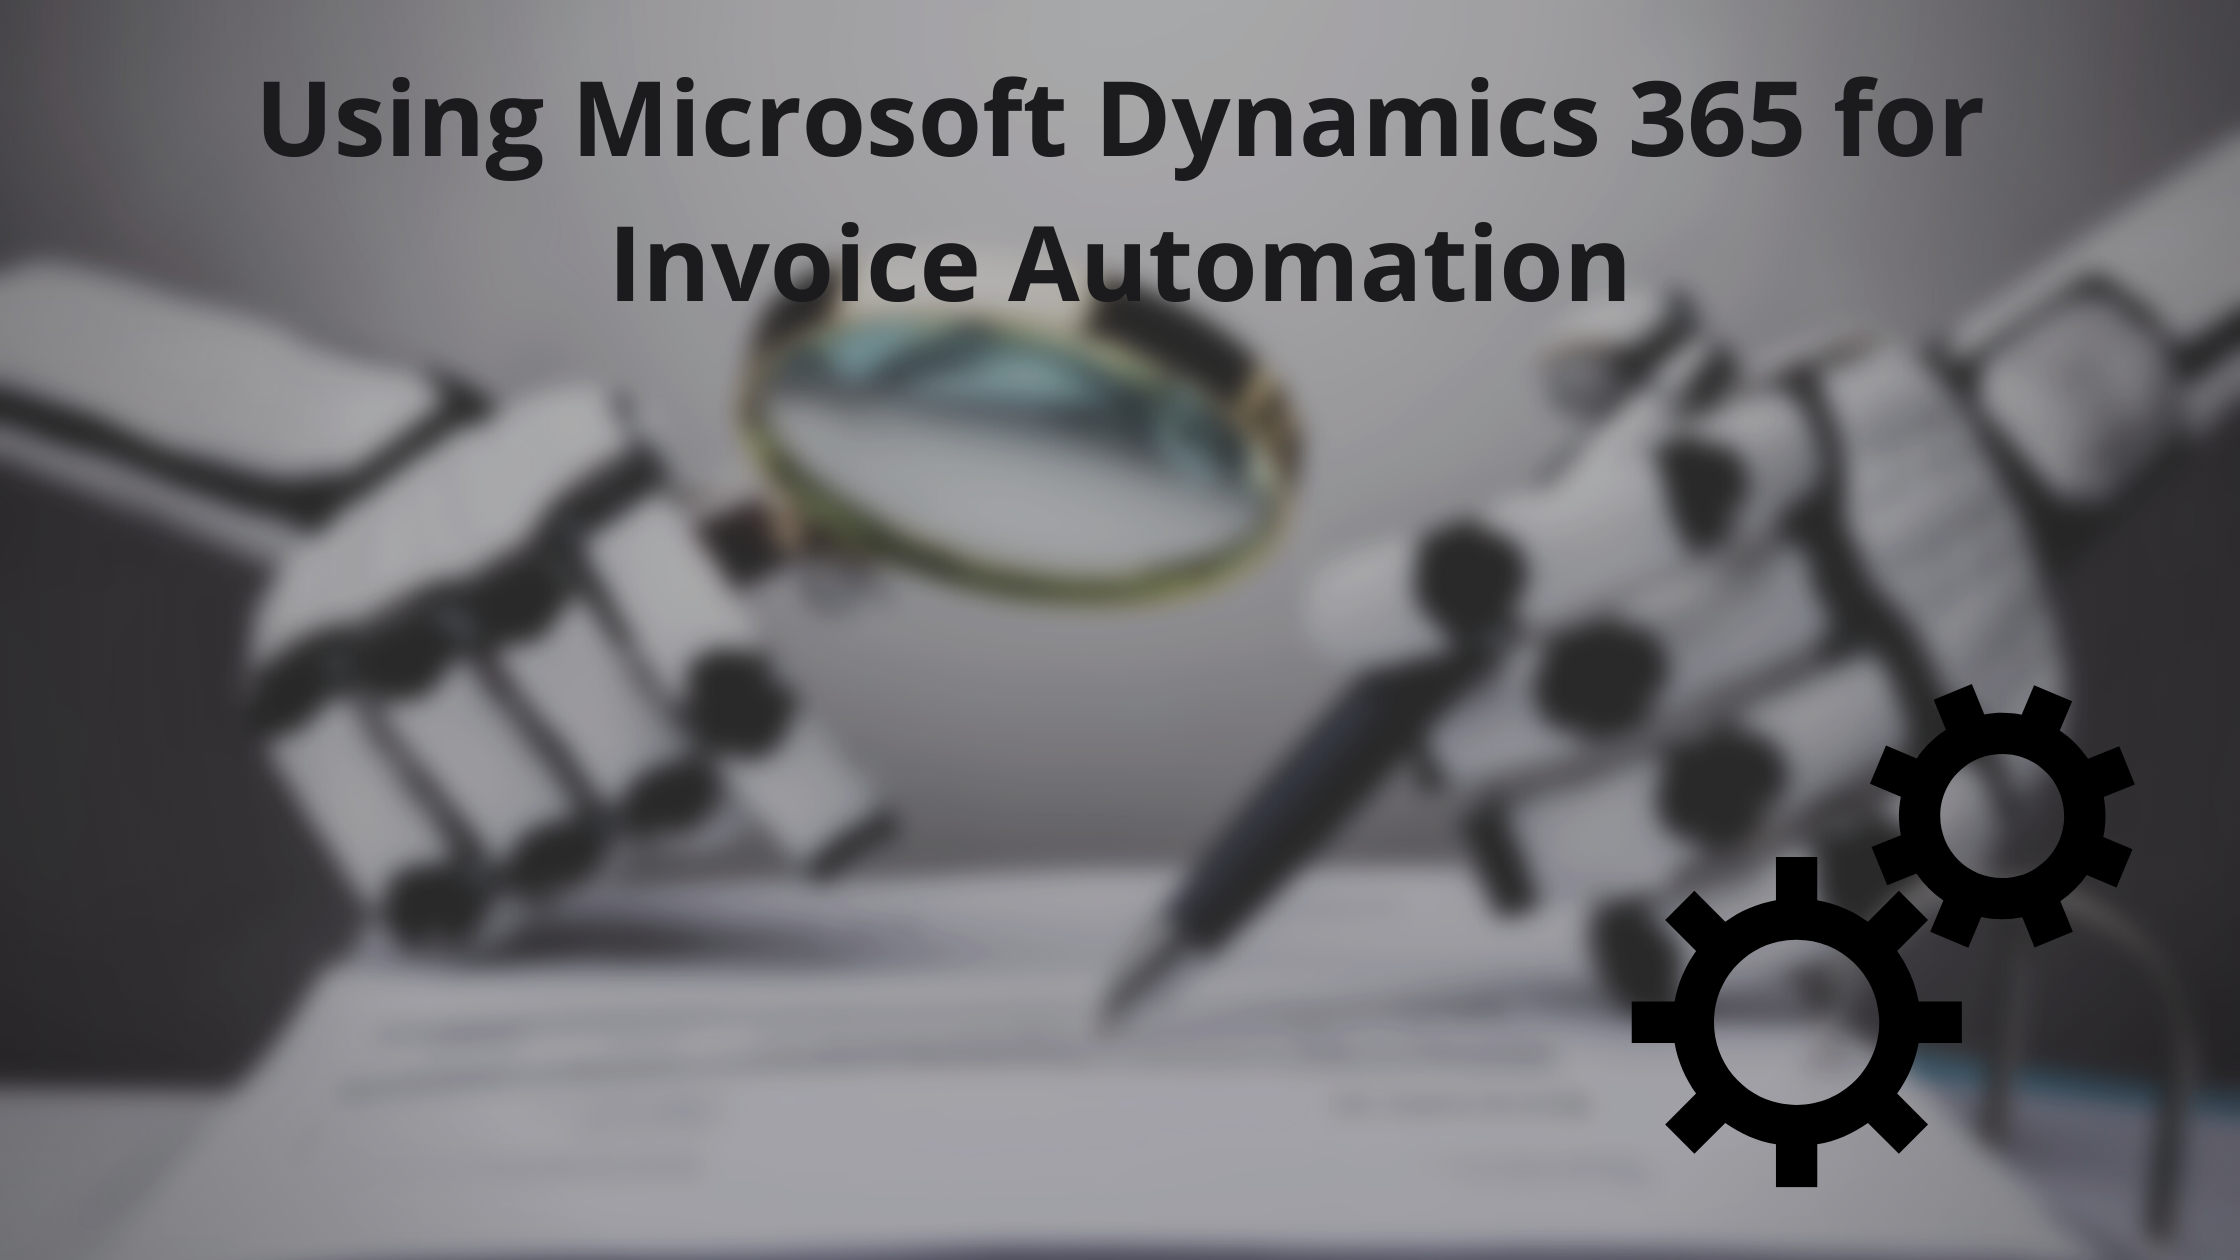 Microsoft Dynamics 365 for Invoice Automation